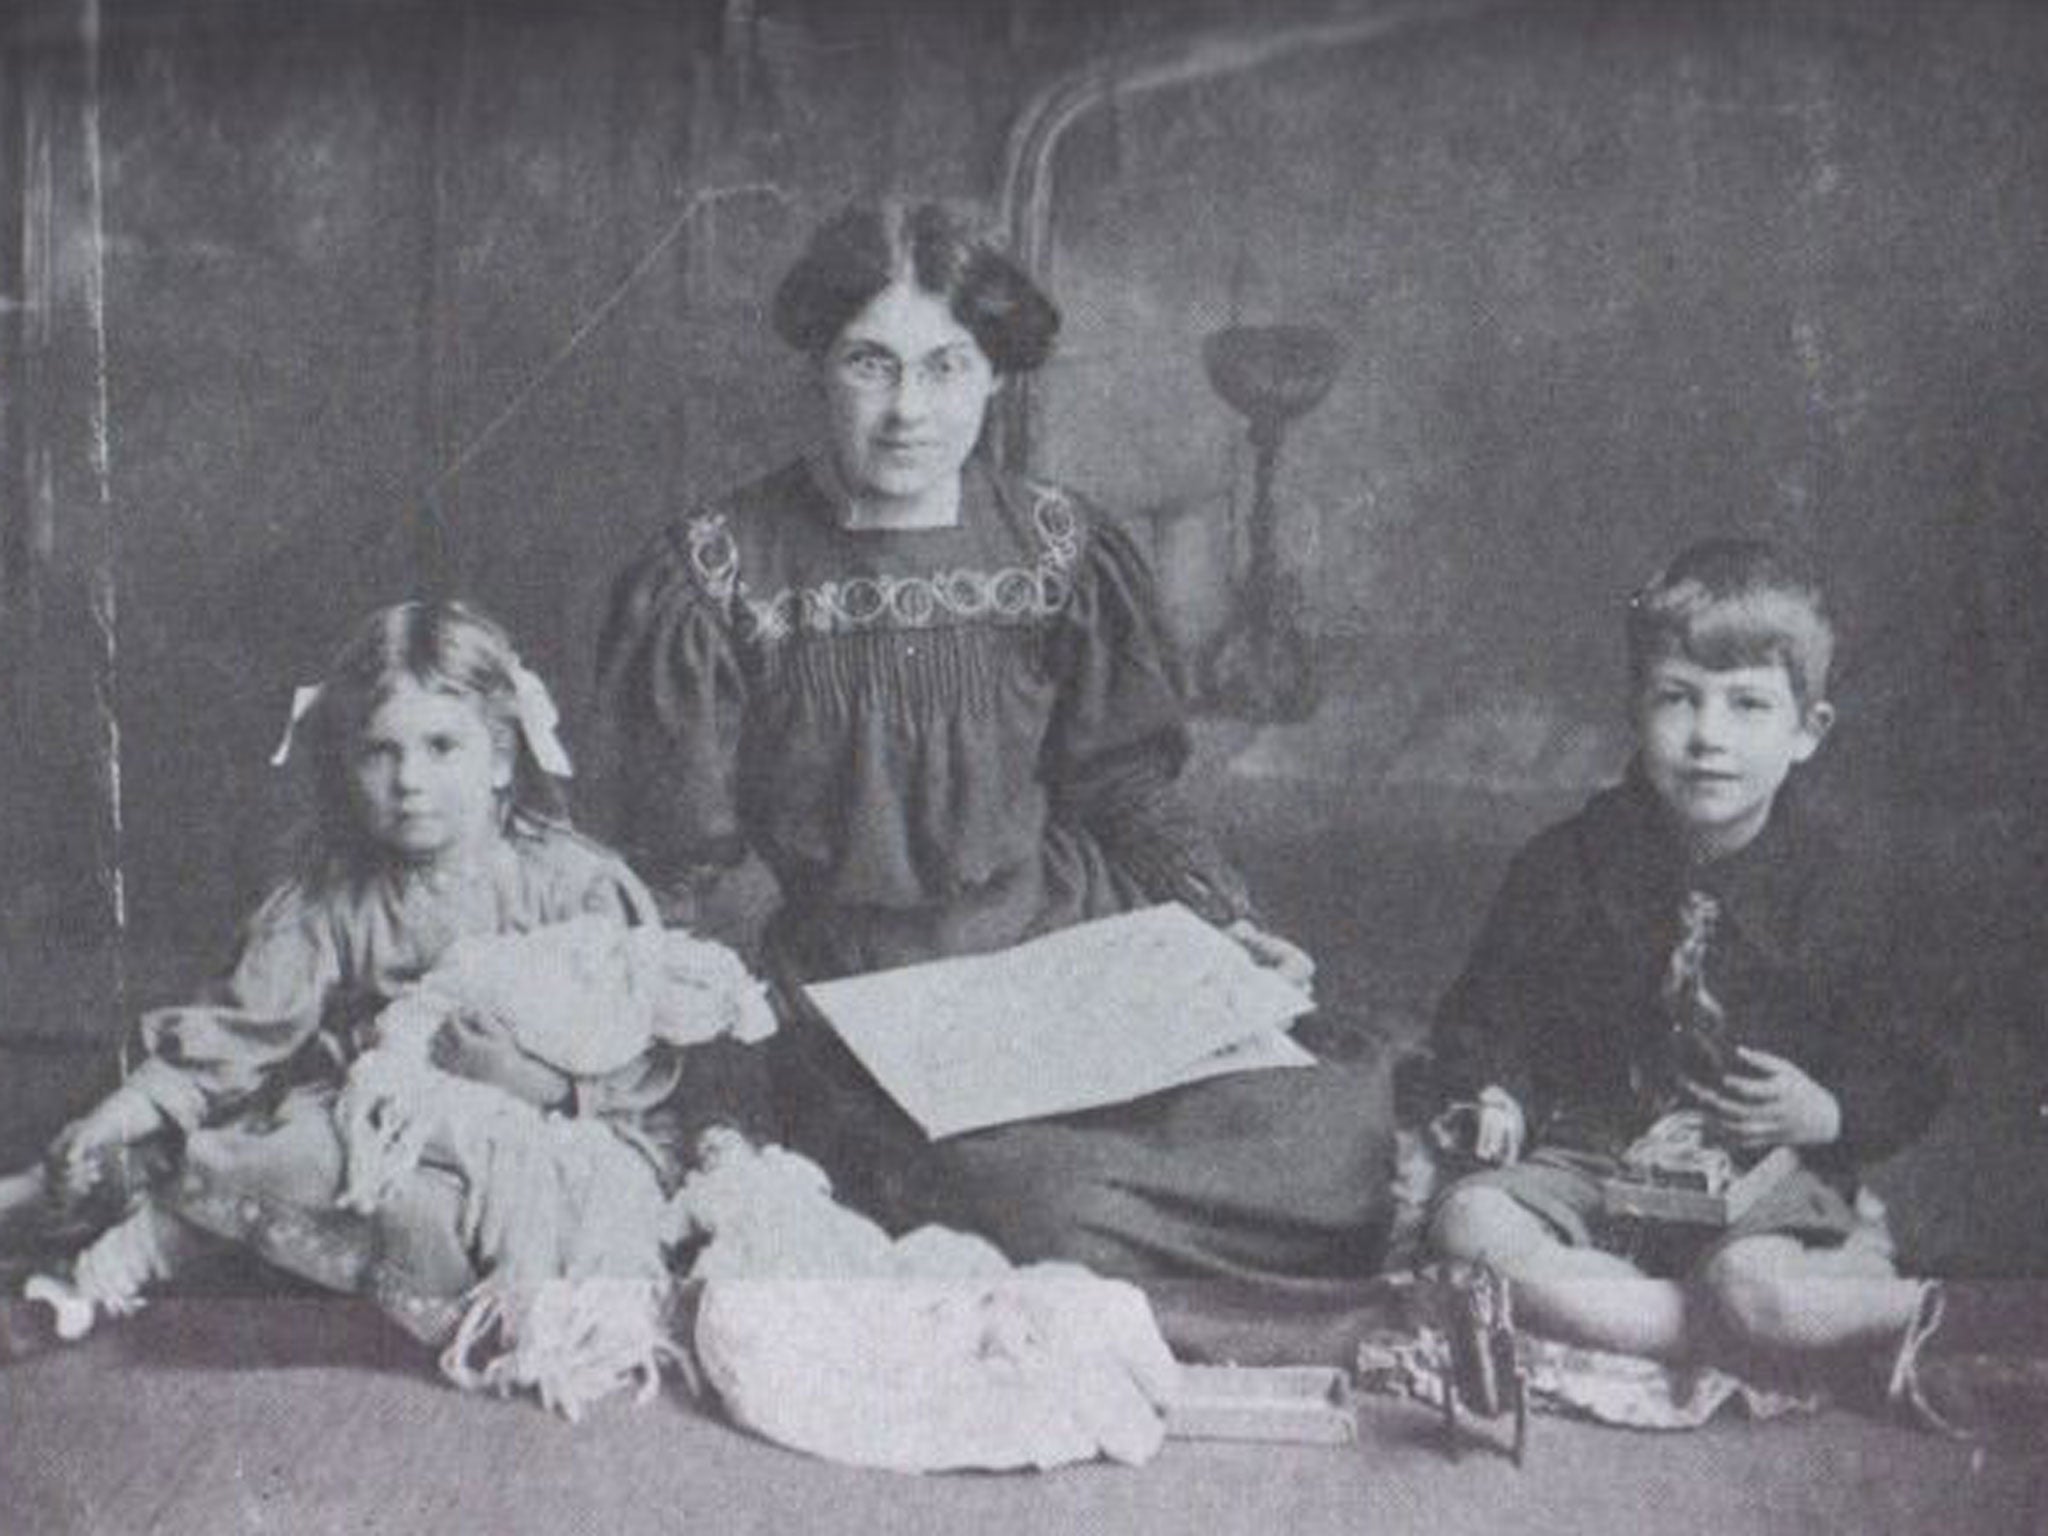 Edward’s wife Helen with two of their three children, Merfyn and Bronwen